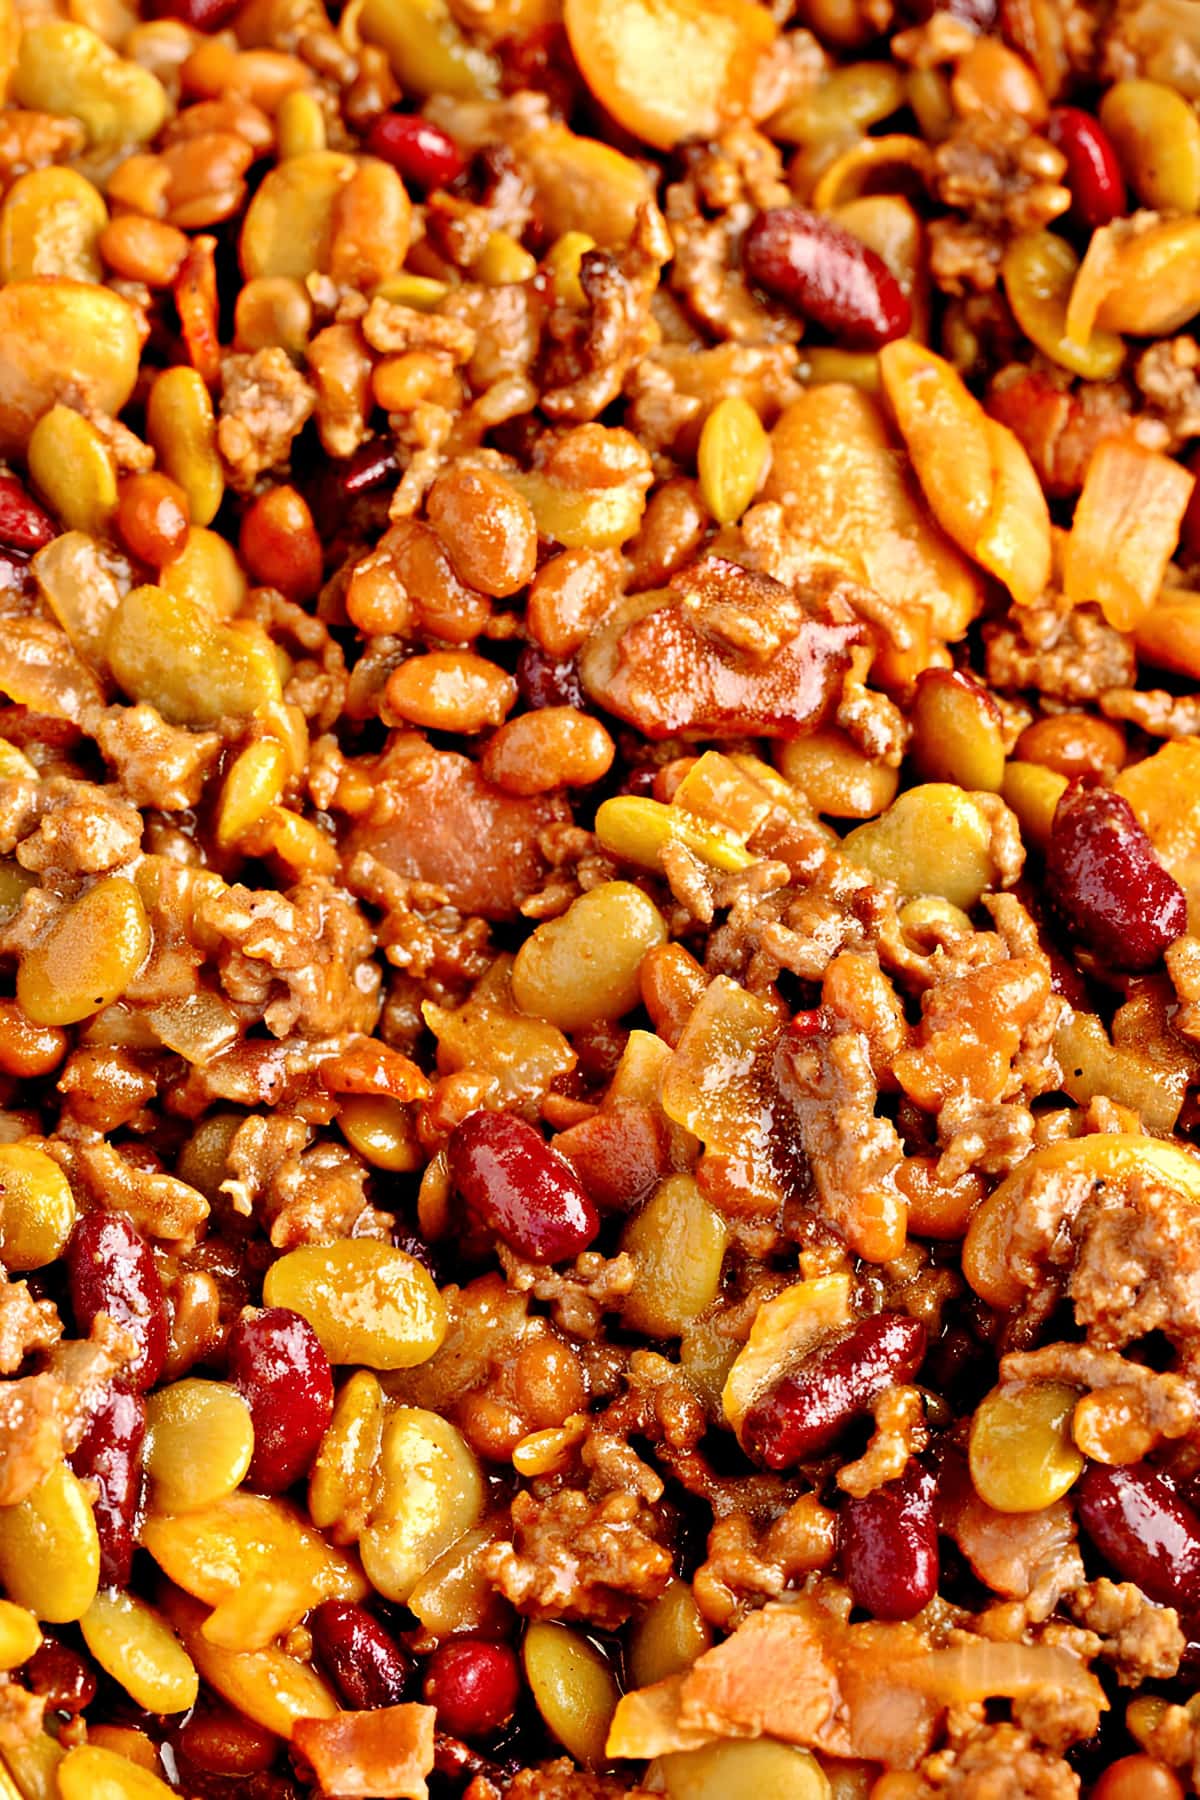 Close-up view of calico beans with ground beef, bacon and mustard powder